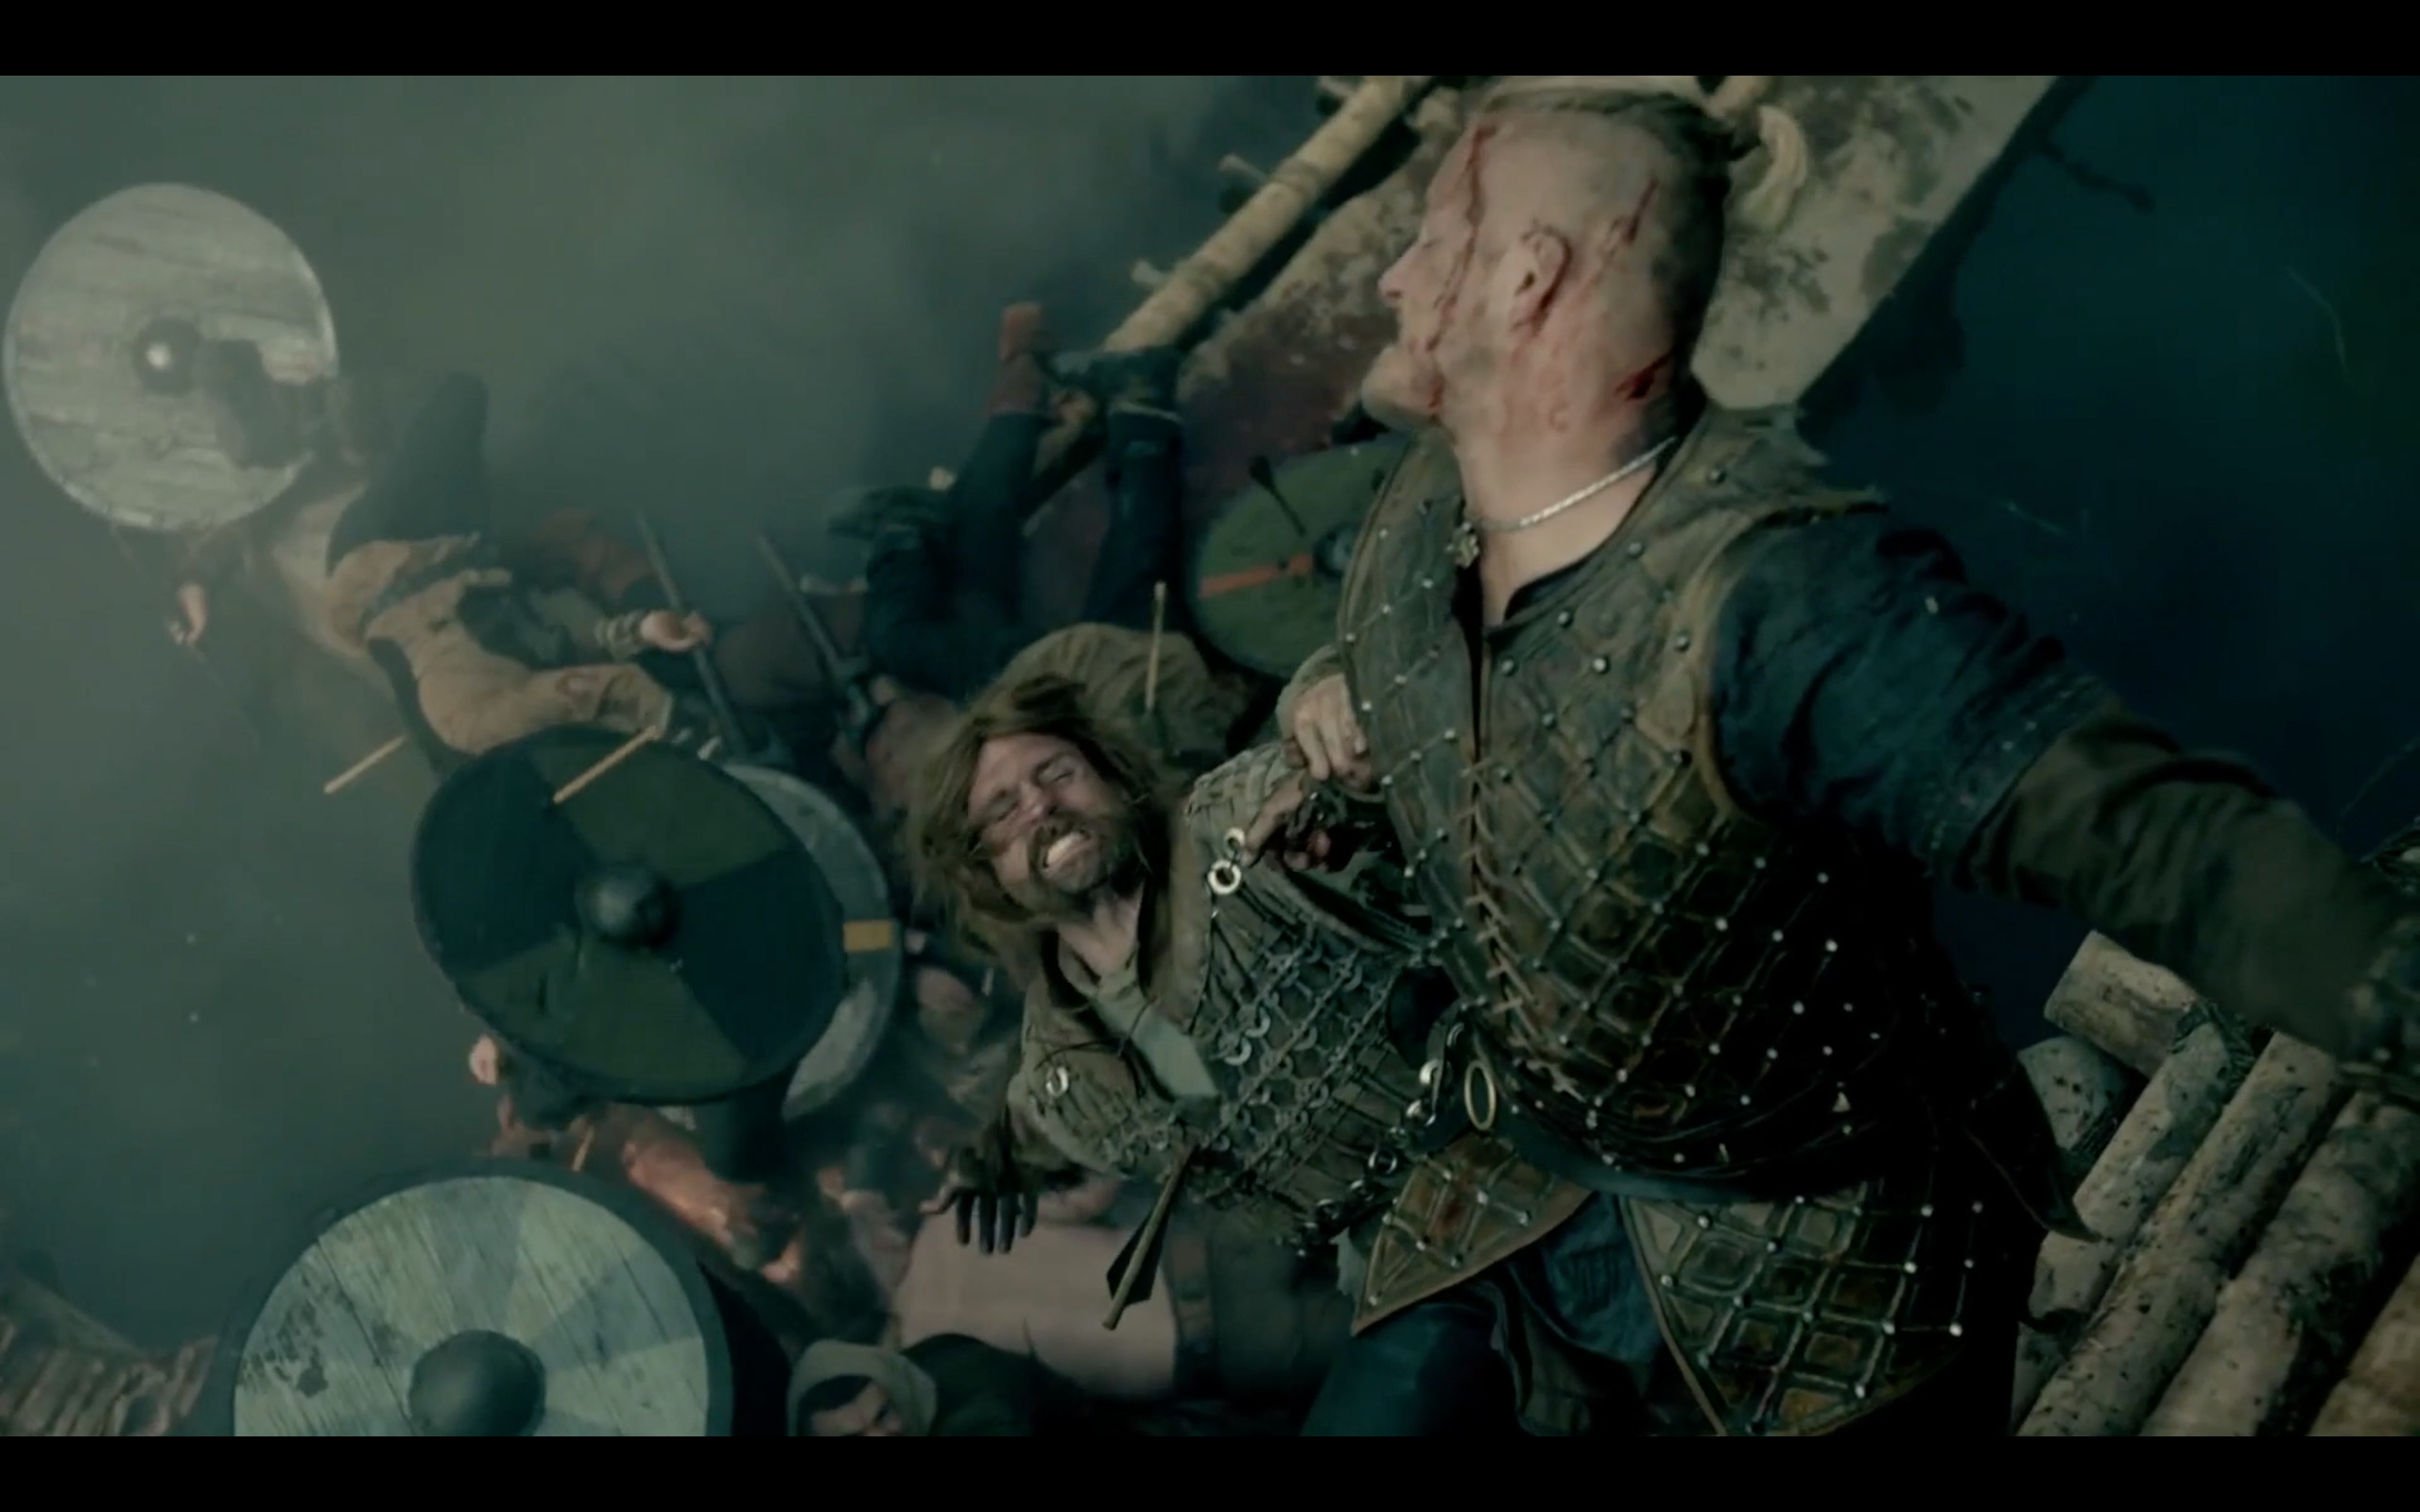 Vikings Season 3 Episode 8 Hanging out with Alexander Ludwig